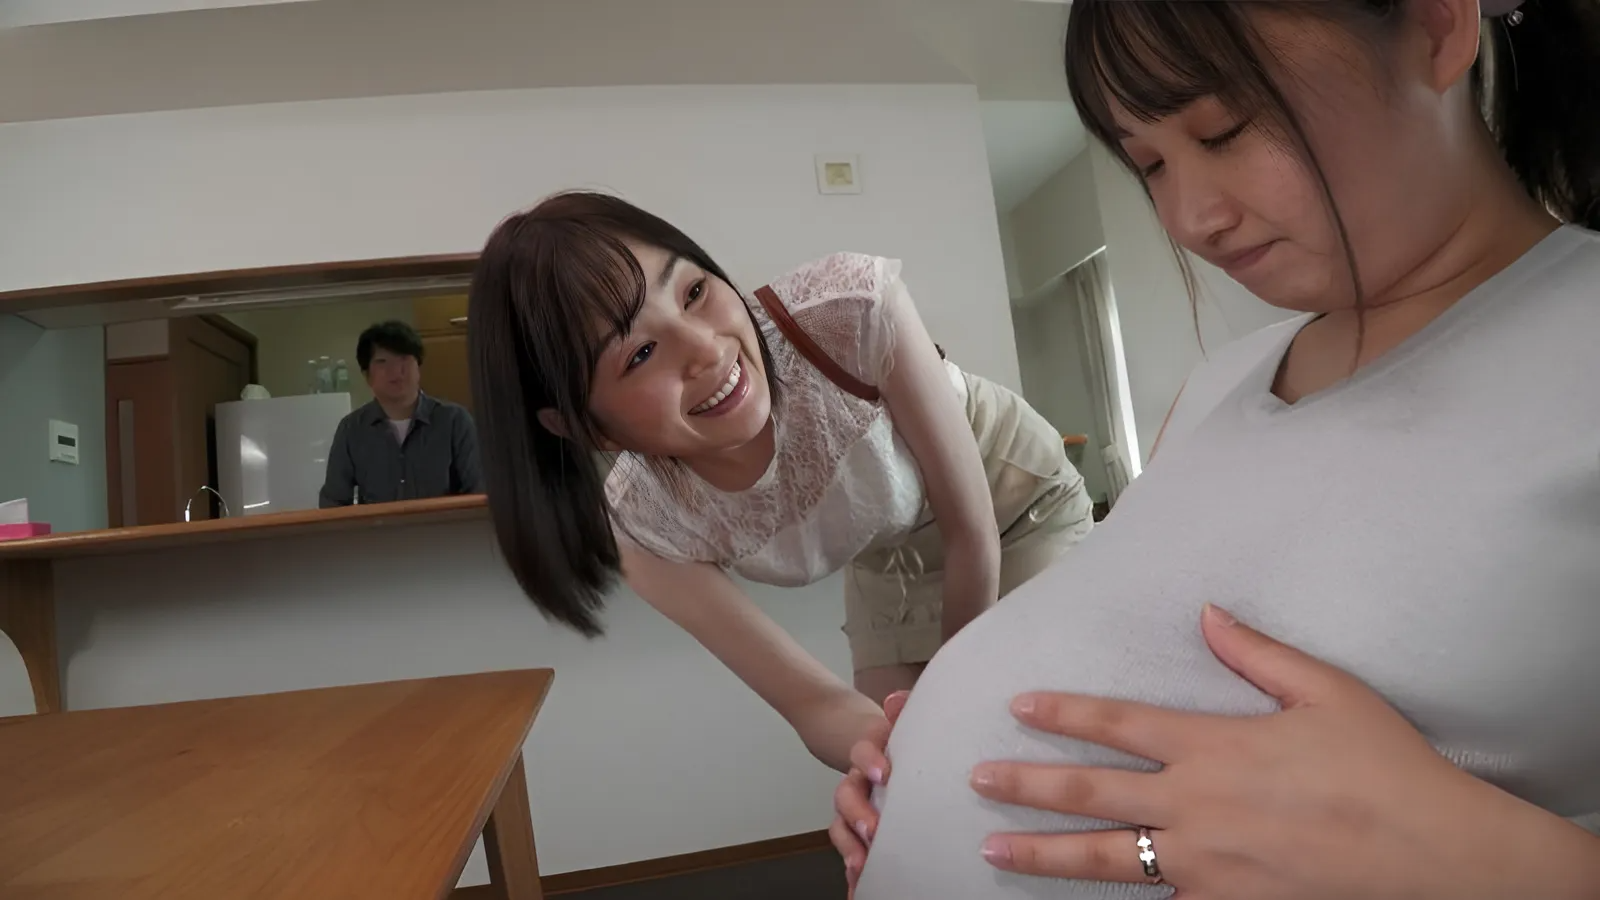 BF-676 The older sister replaces the younger sister in taking care of her husband while pregnant